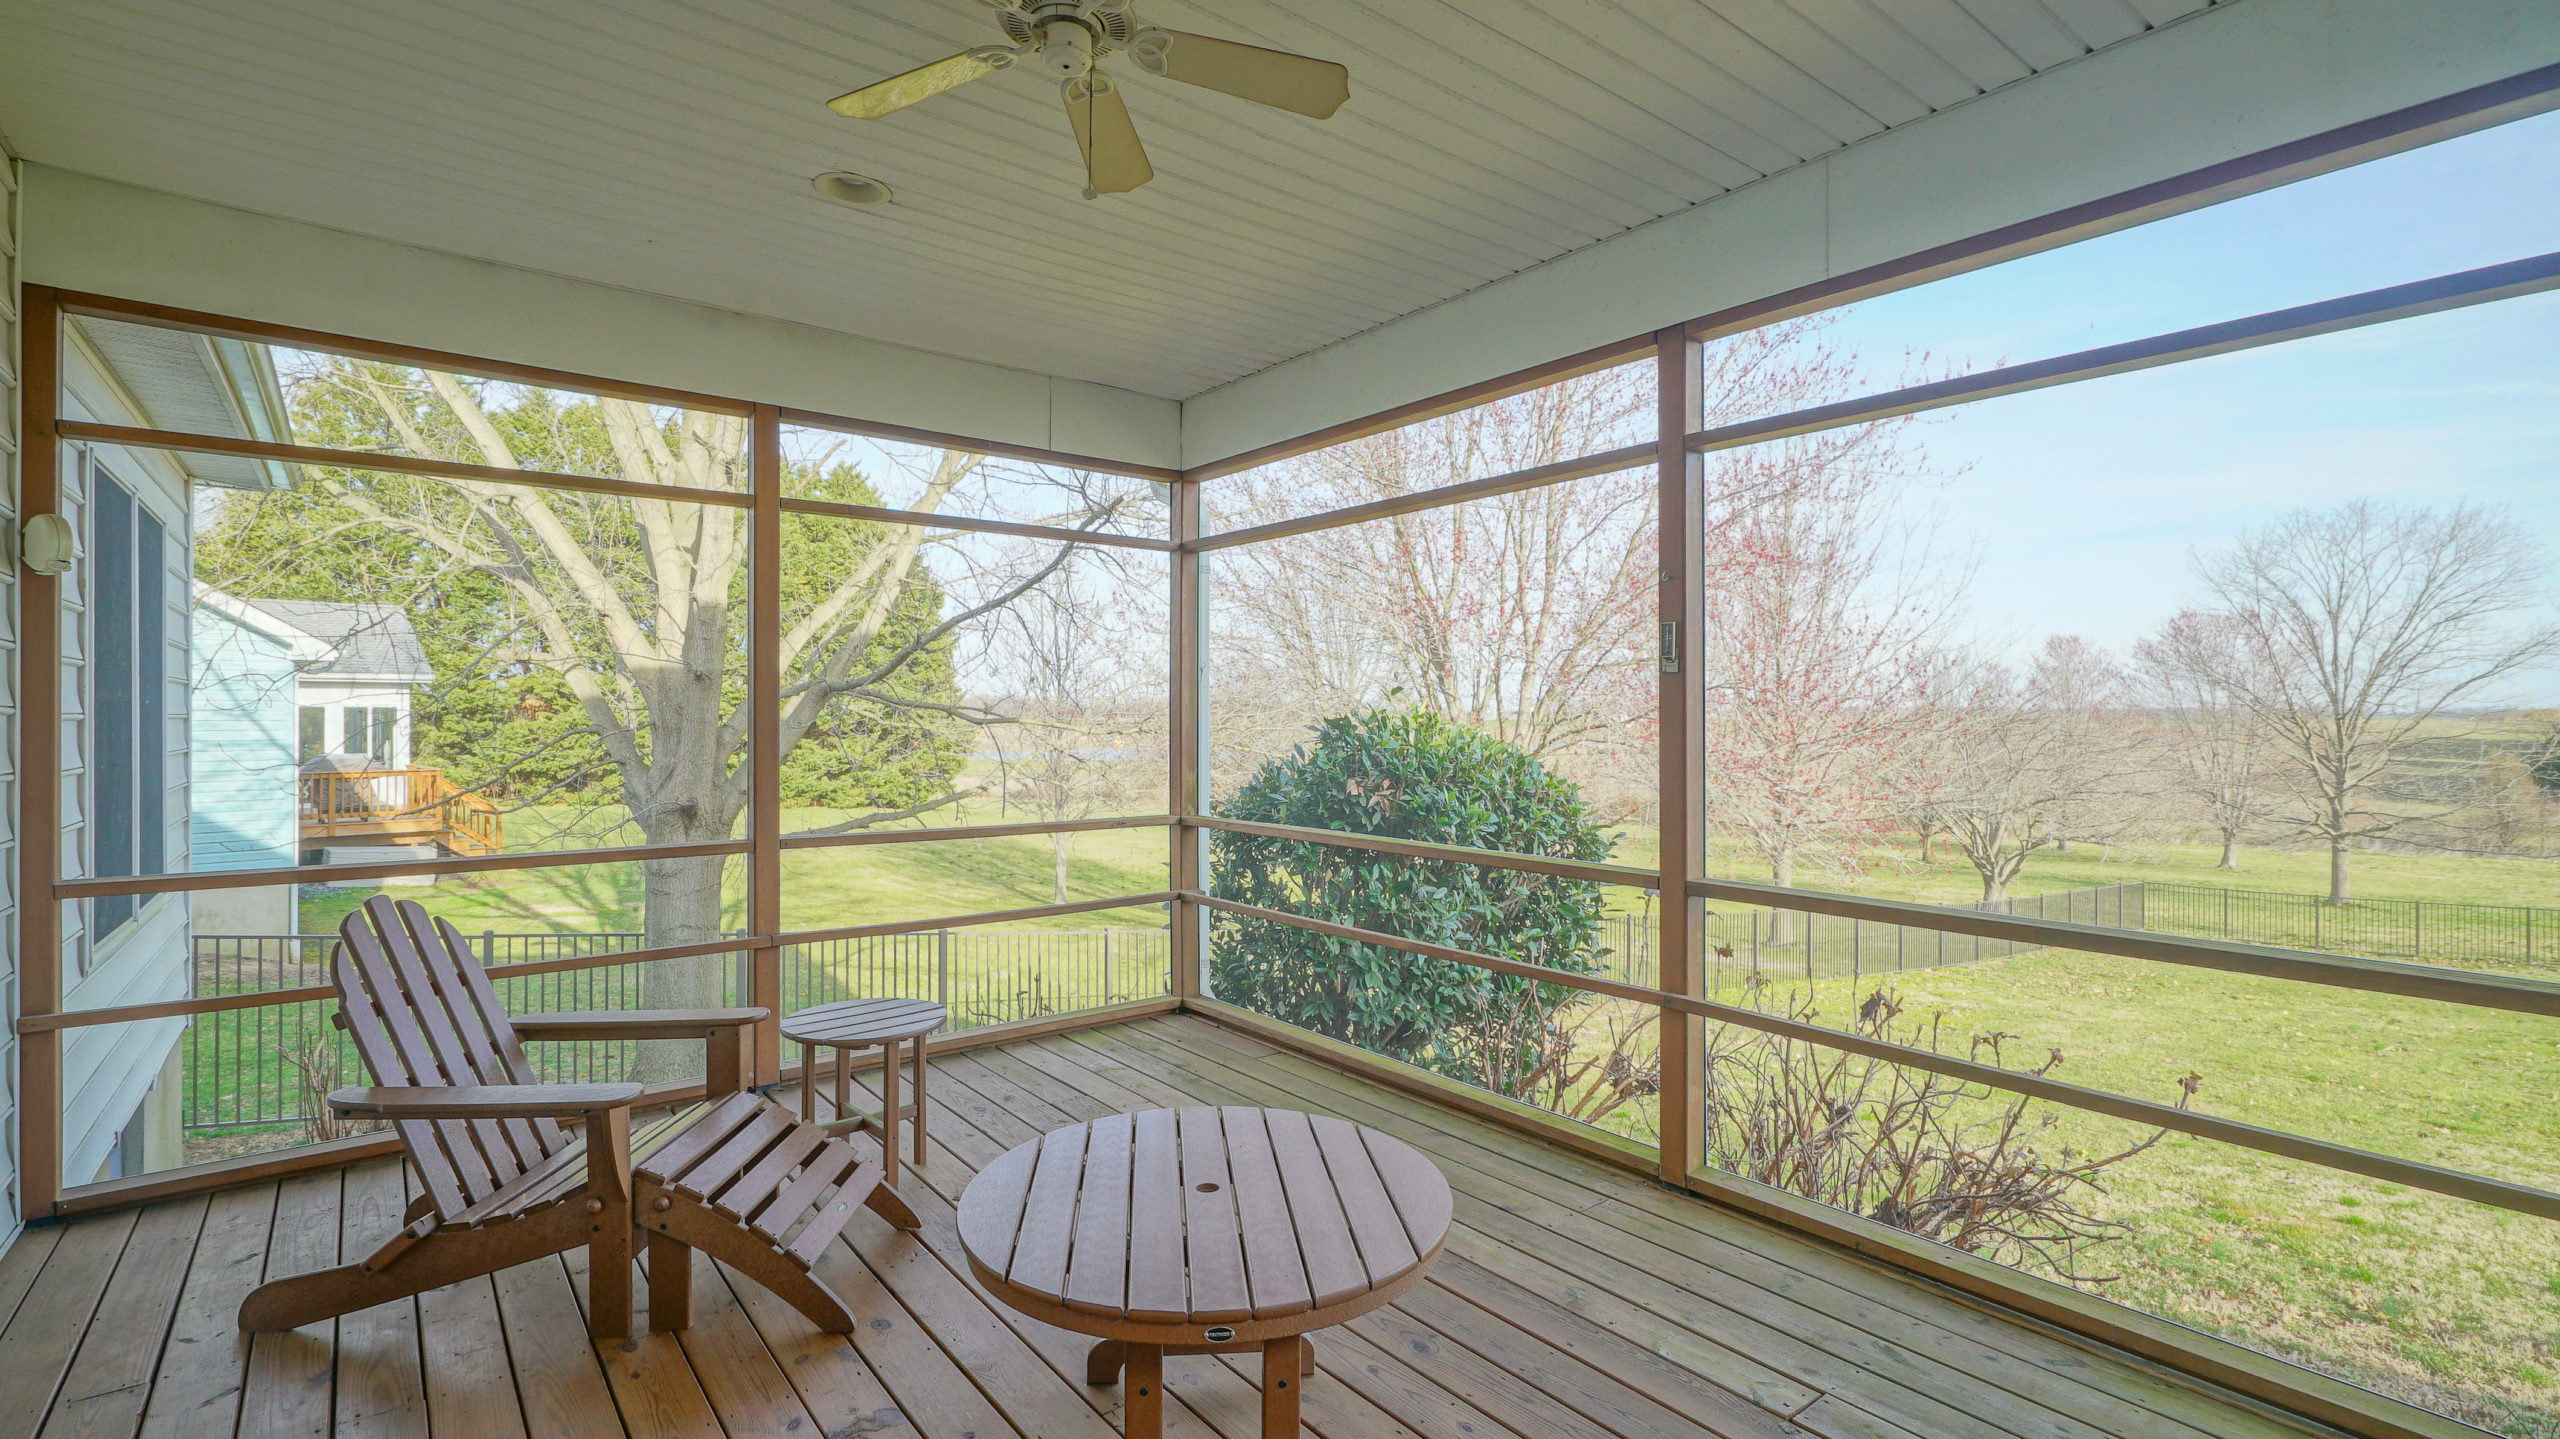 House for Sale in Chestertown Maryland View of Enclosed Porch